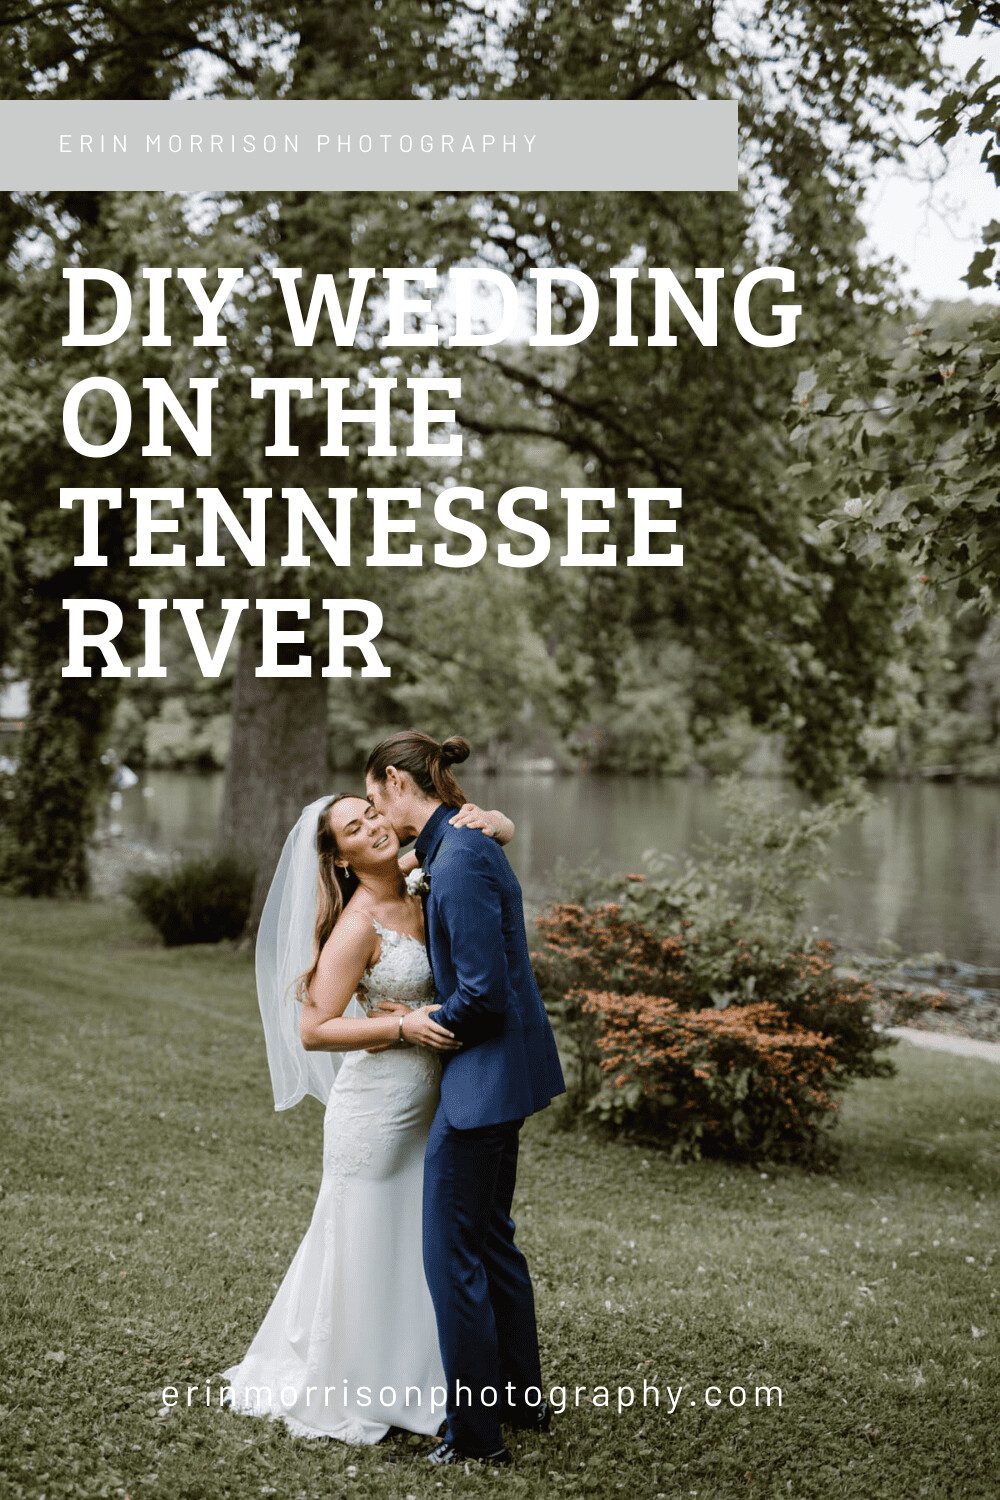 DIY Wedding on the Tennessee River